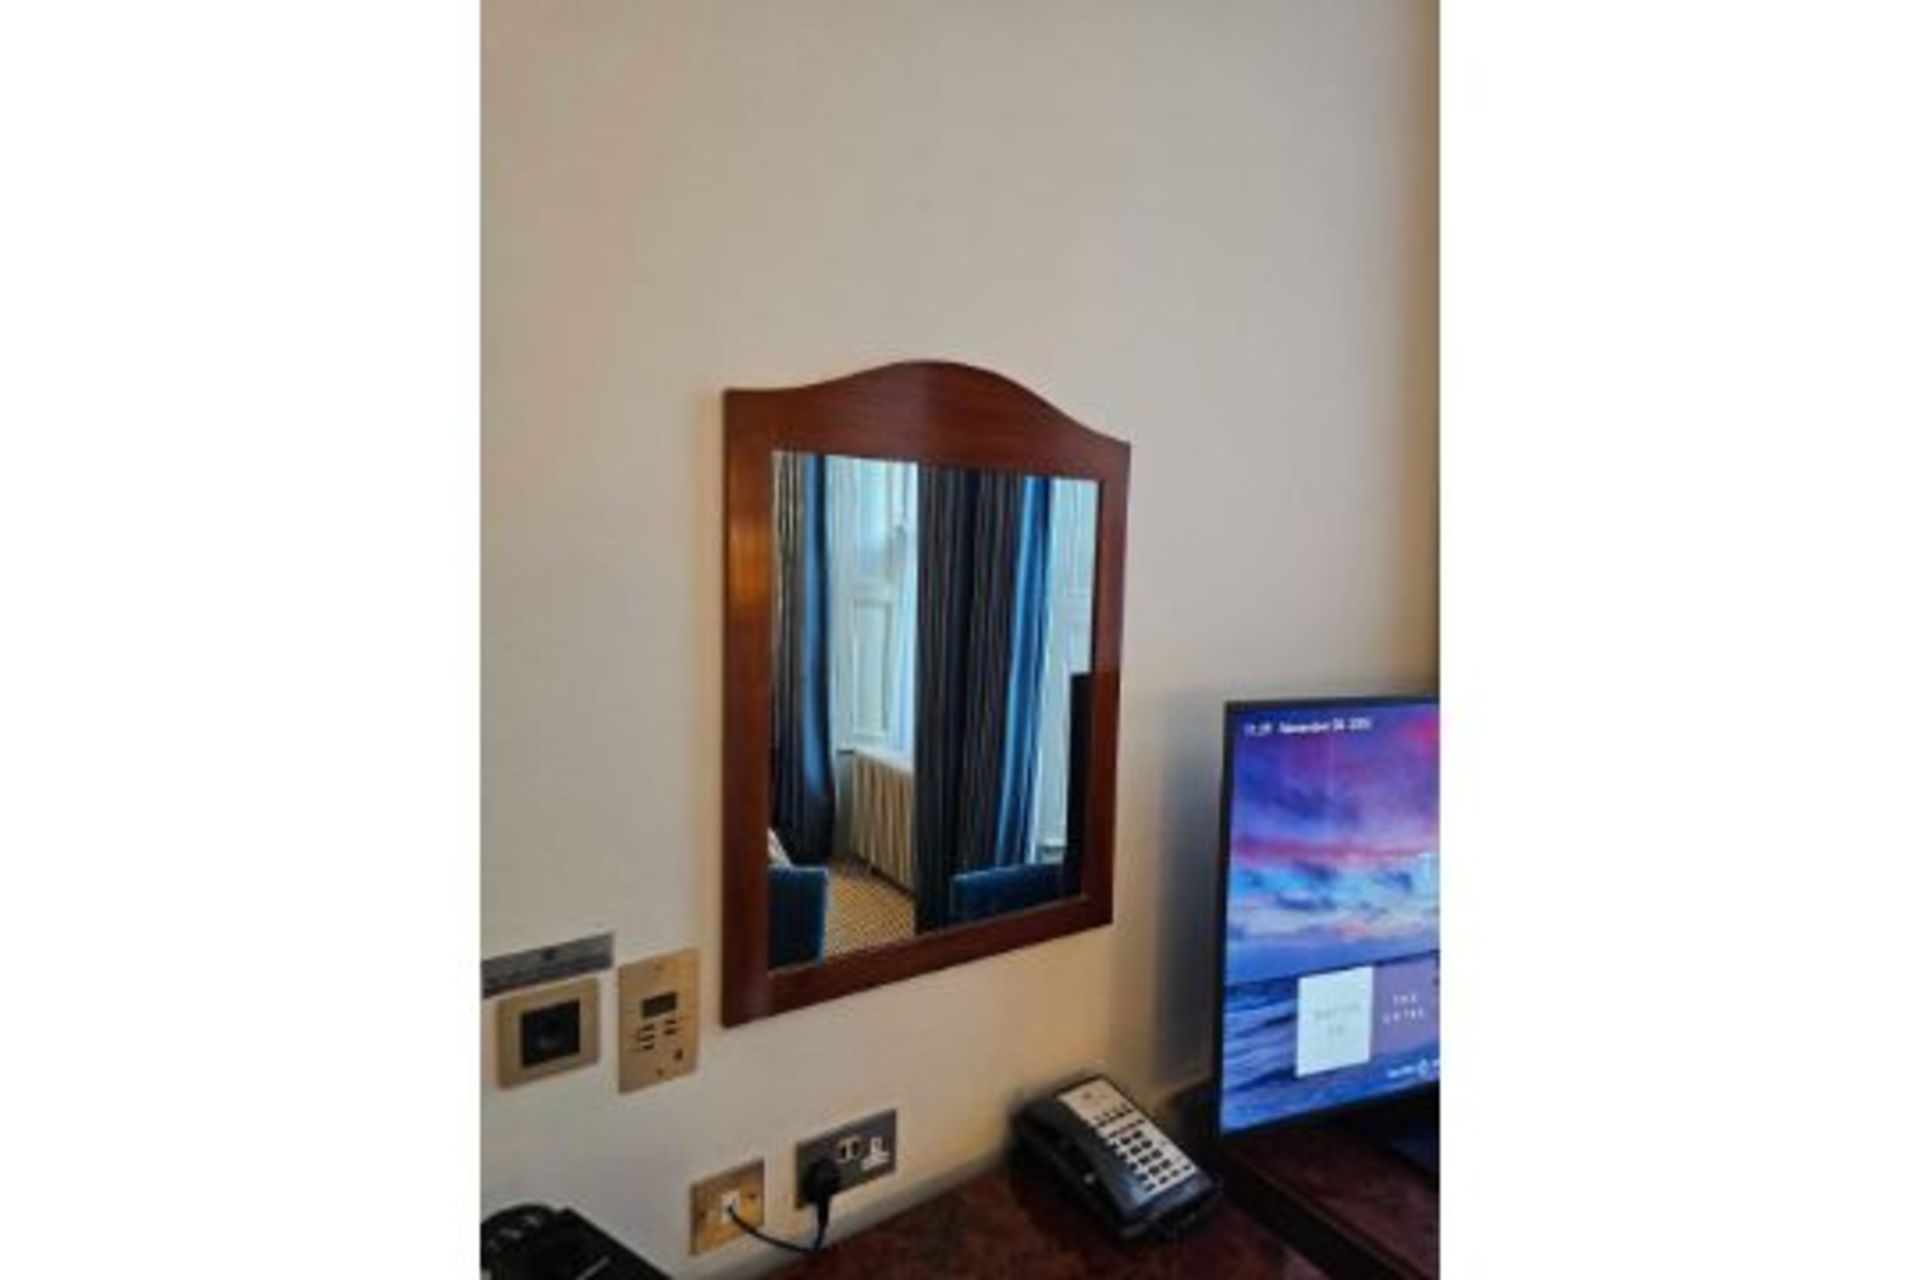 Mahogany Accent Mirror A Simple Shaped Frame With Dome Top Feature 60 x 80cm